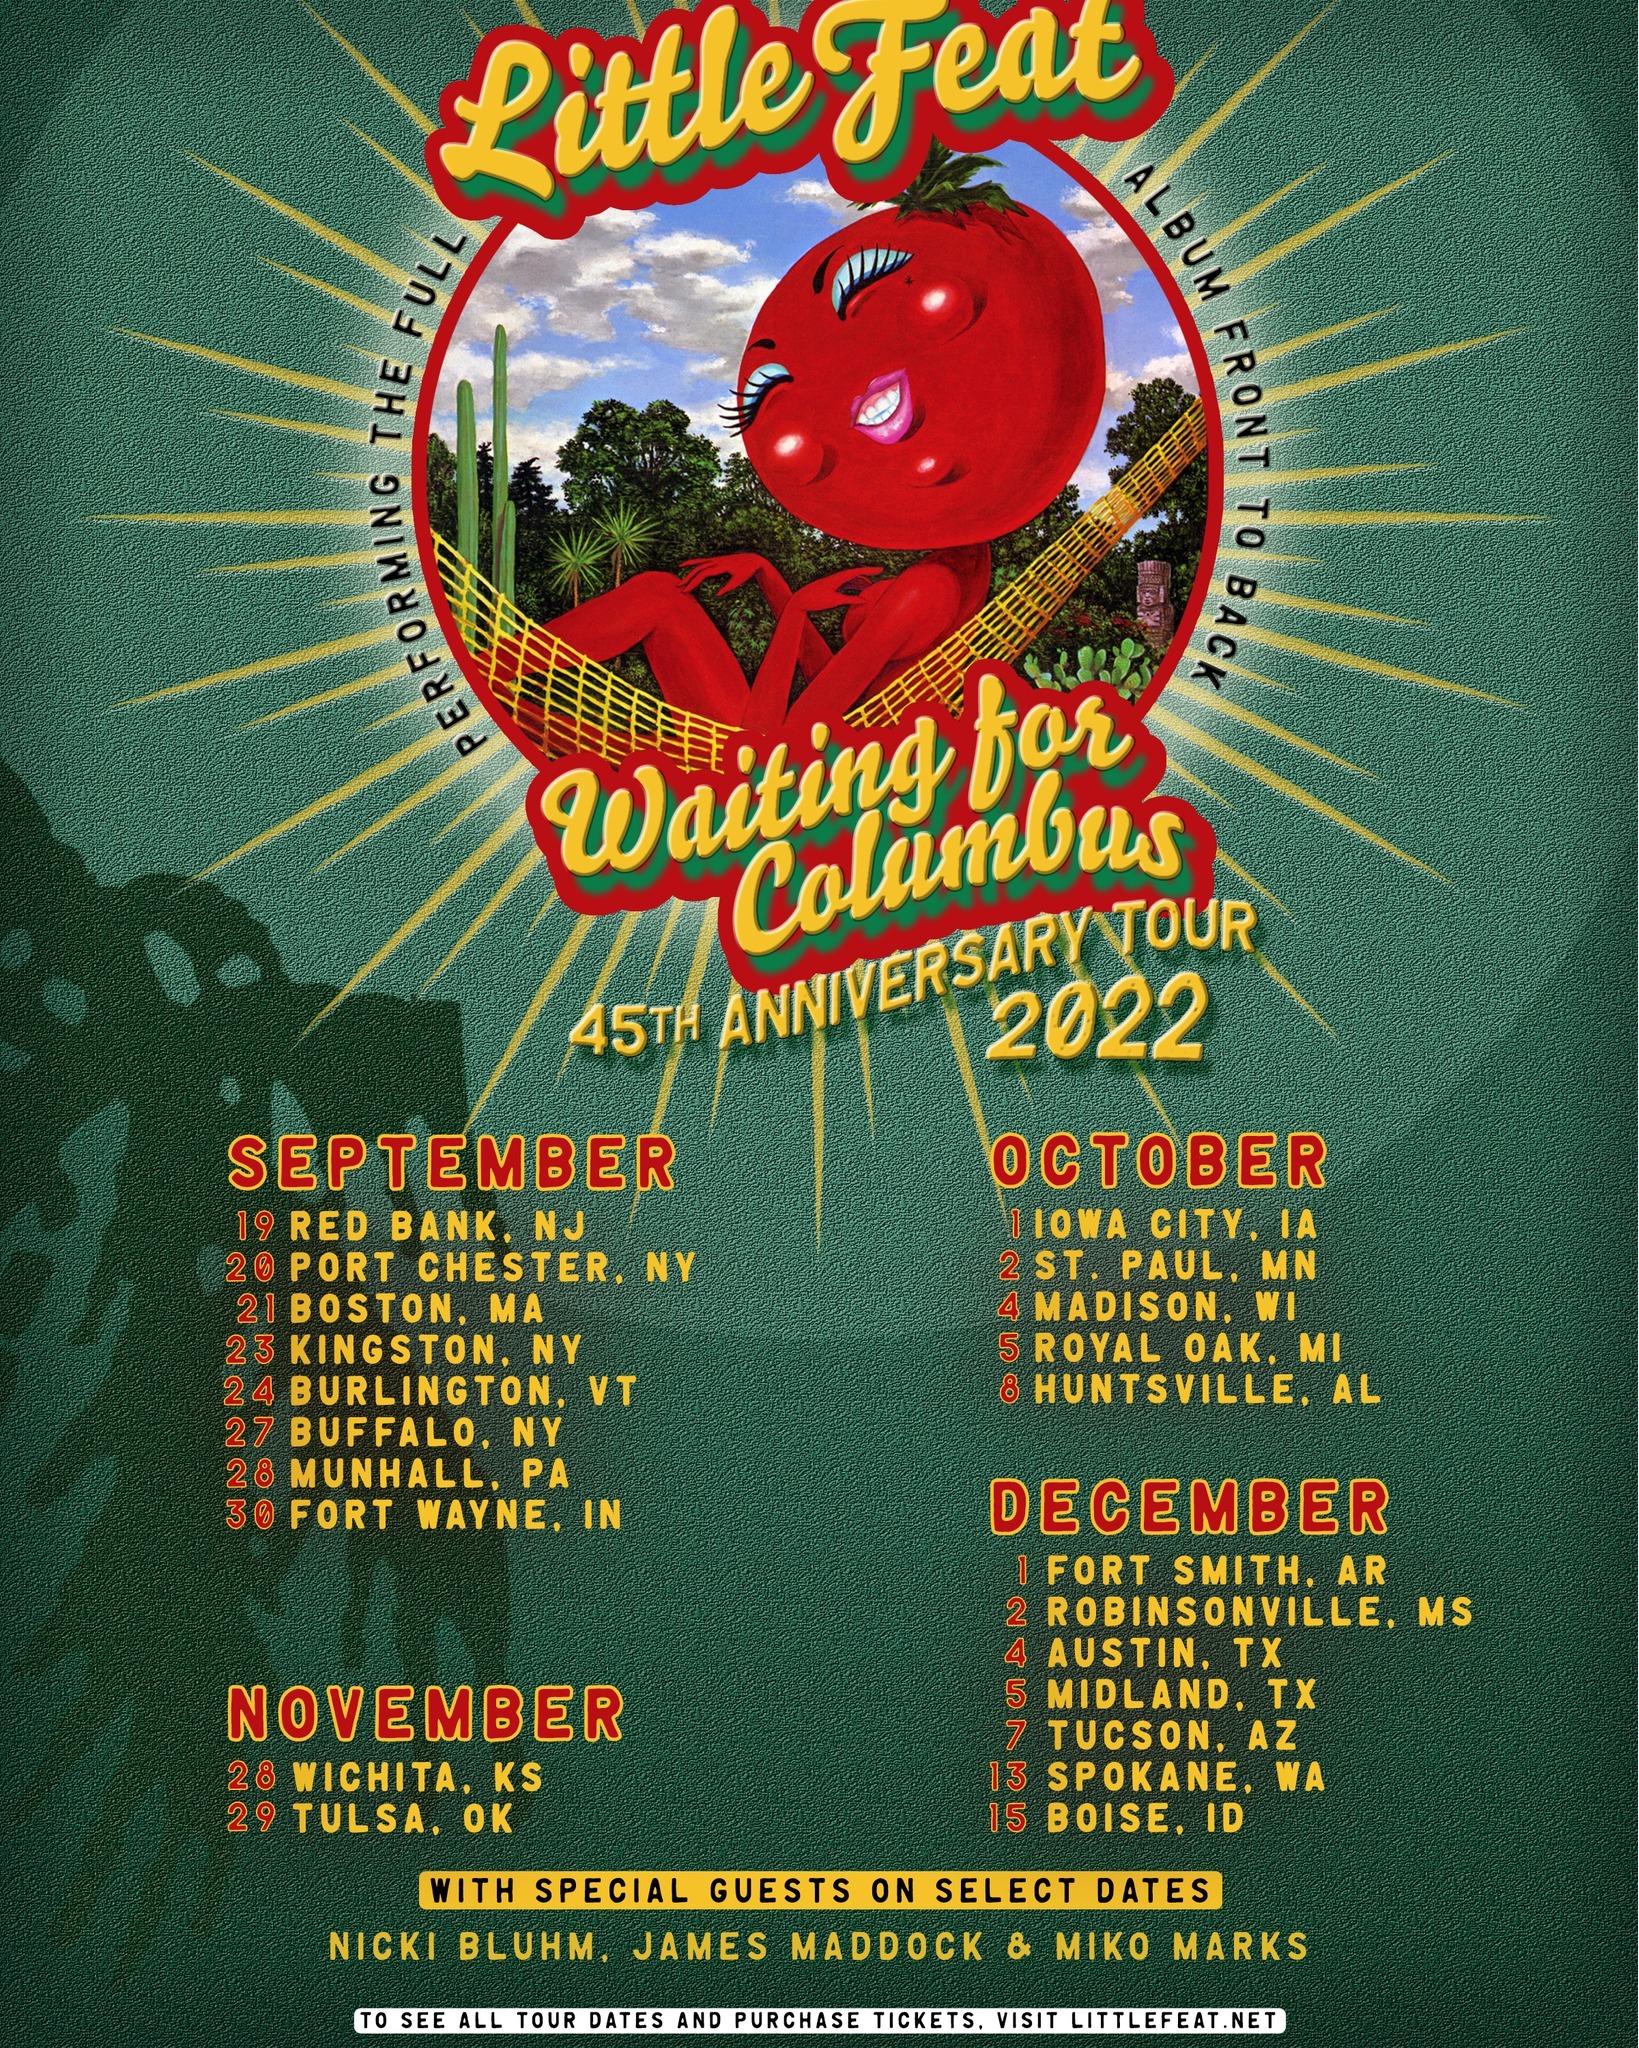 More Shows Announced for Little Feat's 'Waiting for Columbus 45th Anniversary Tour'